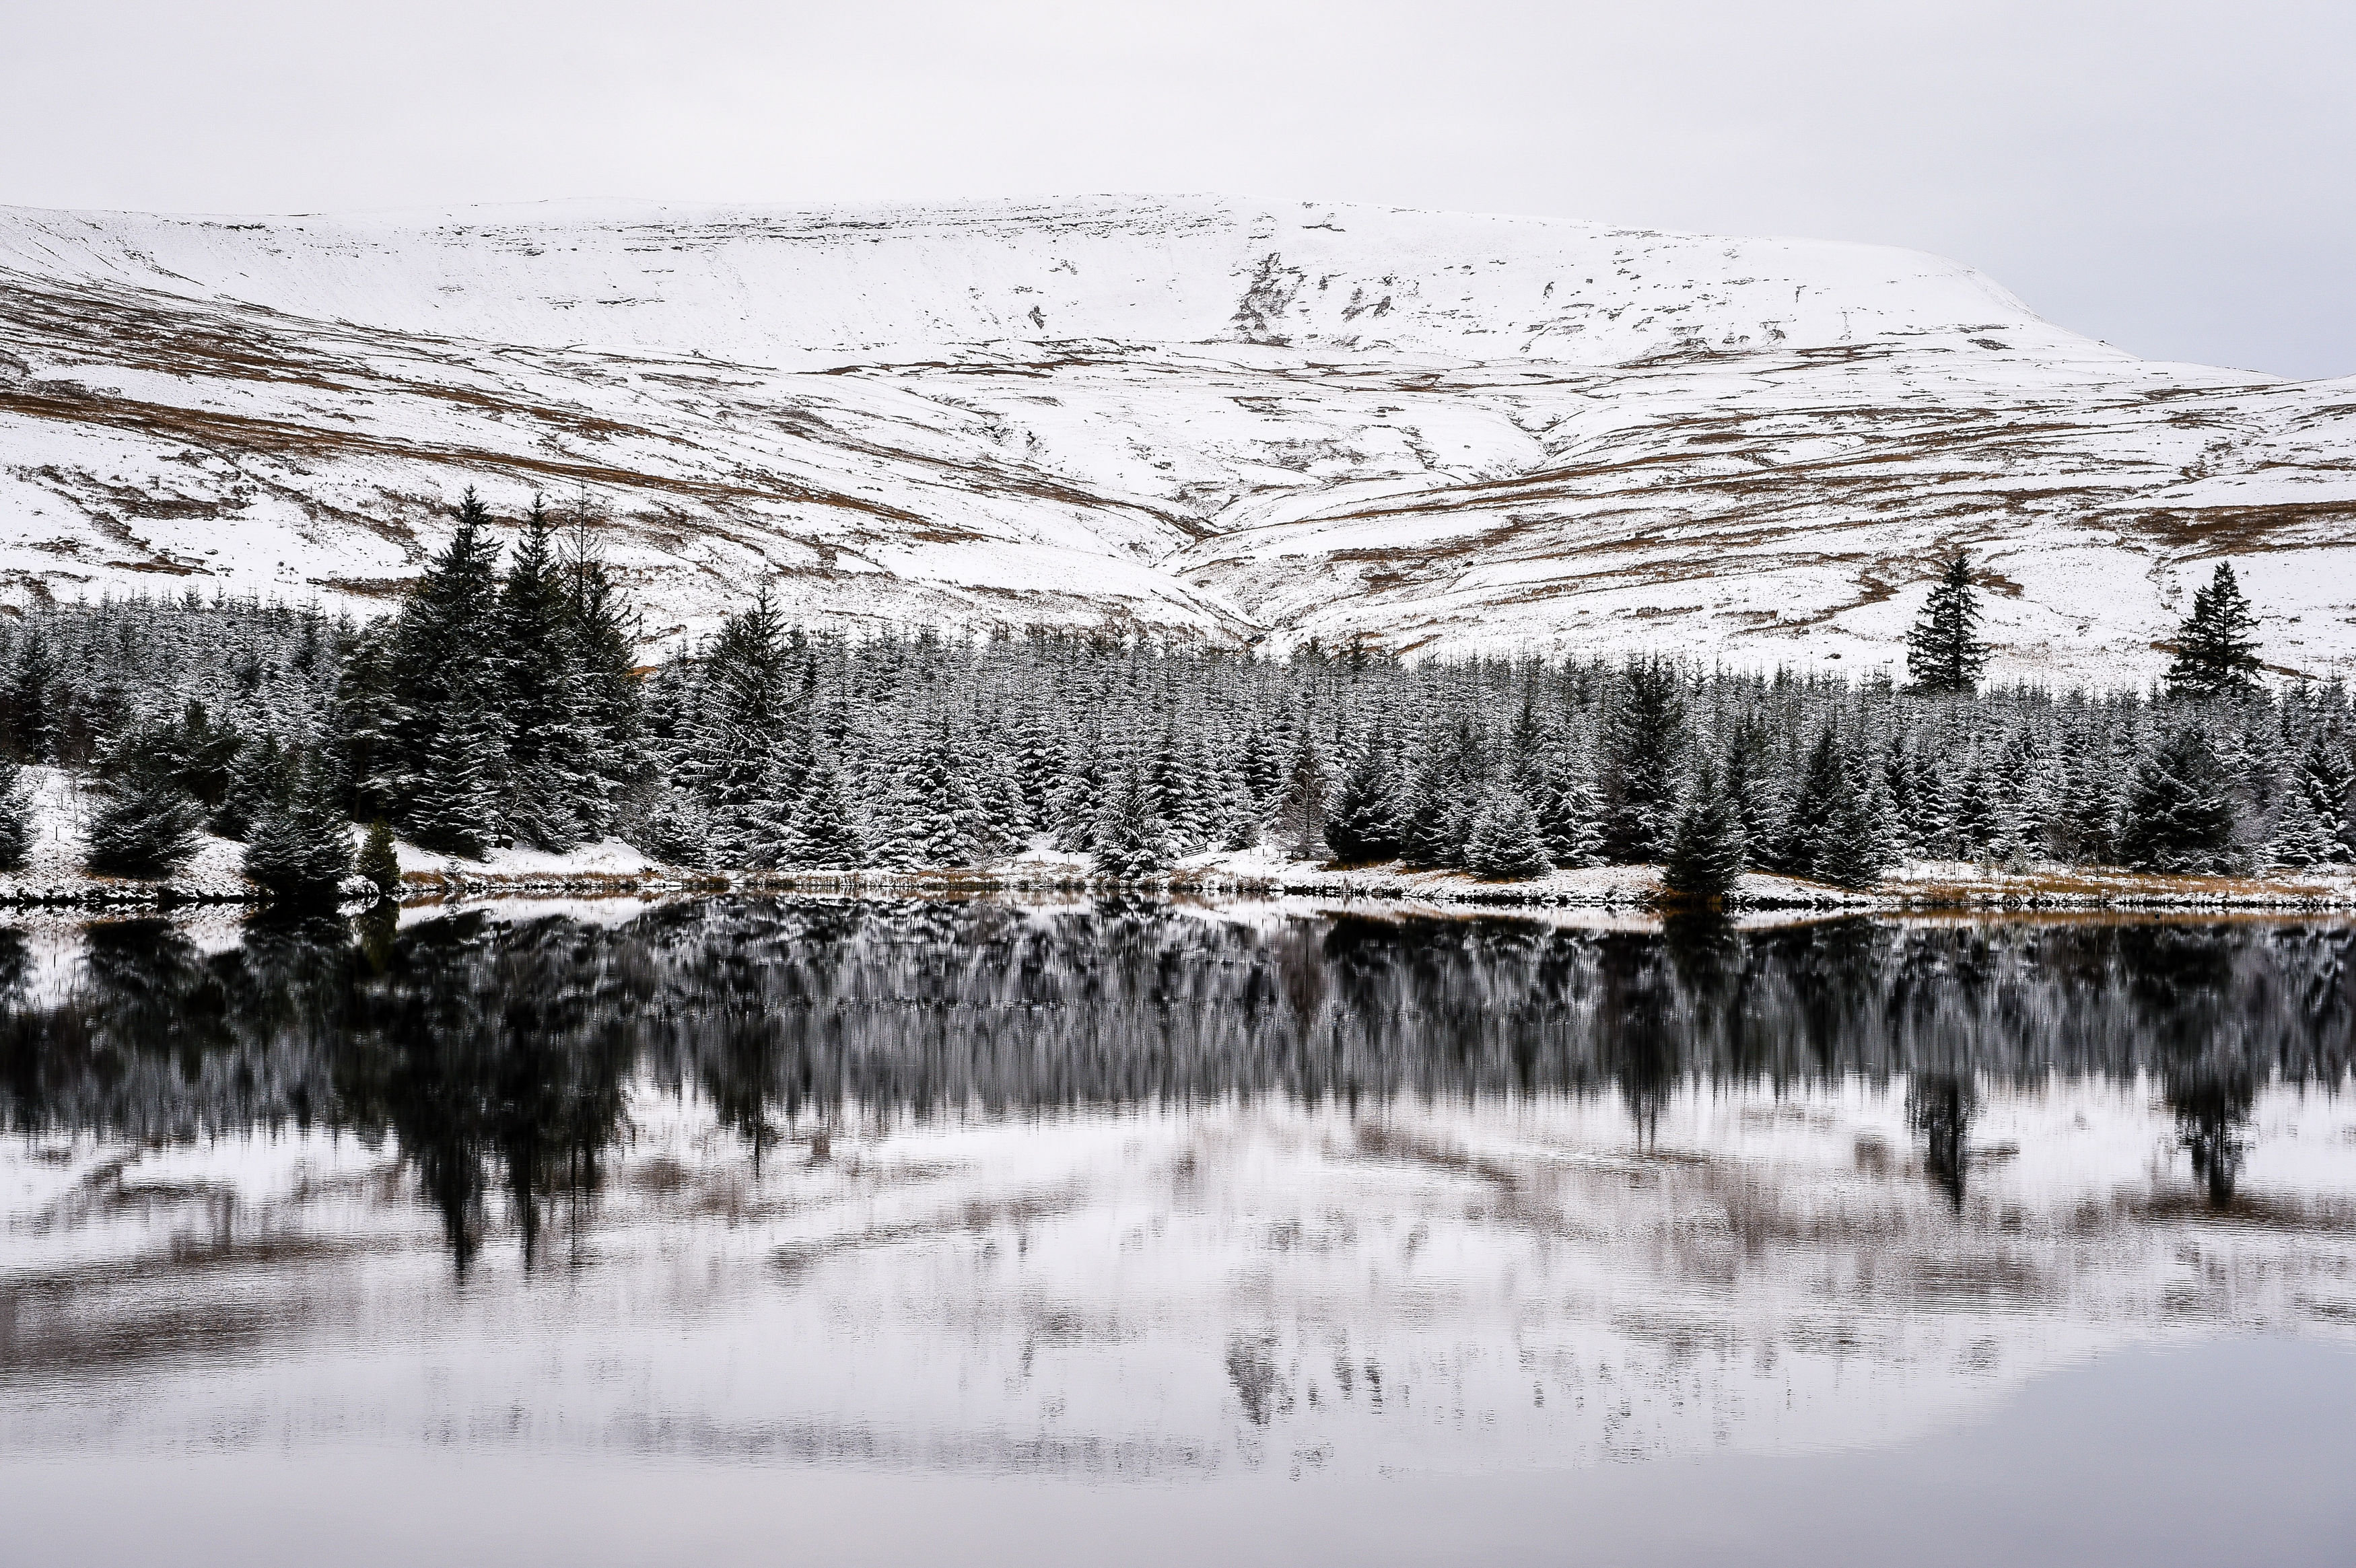 <strong>Snow covers the landscape over the Brecon Beacons, Wales</strong>